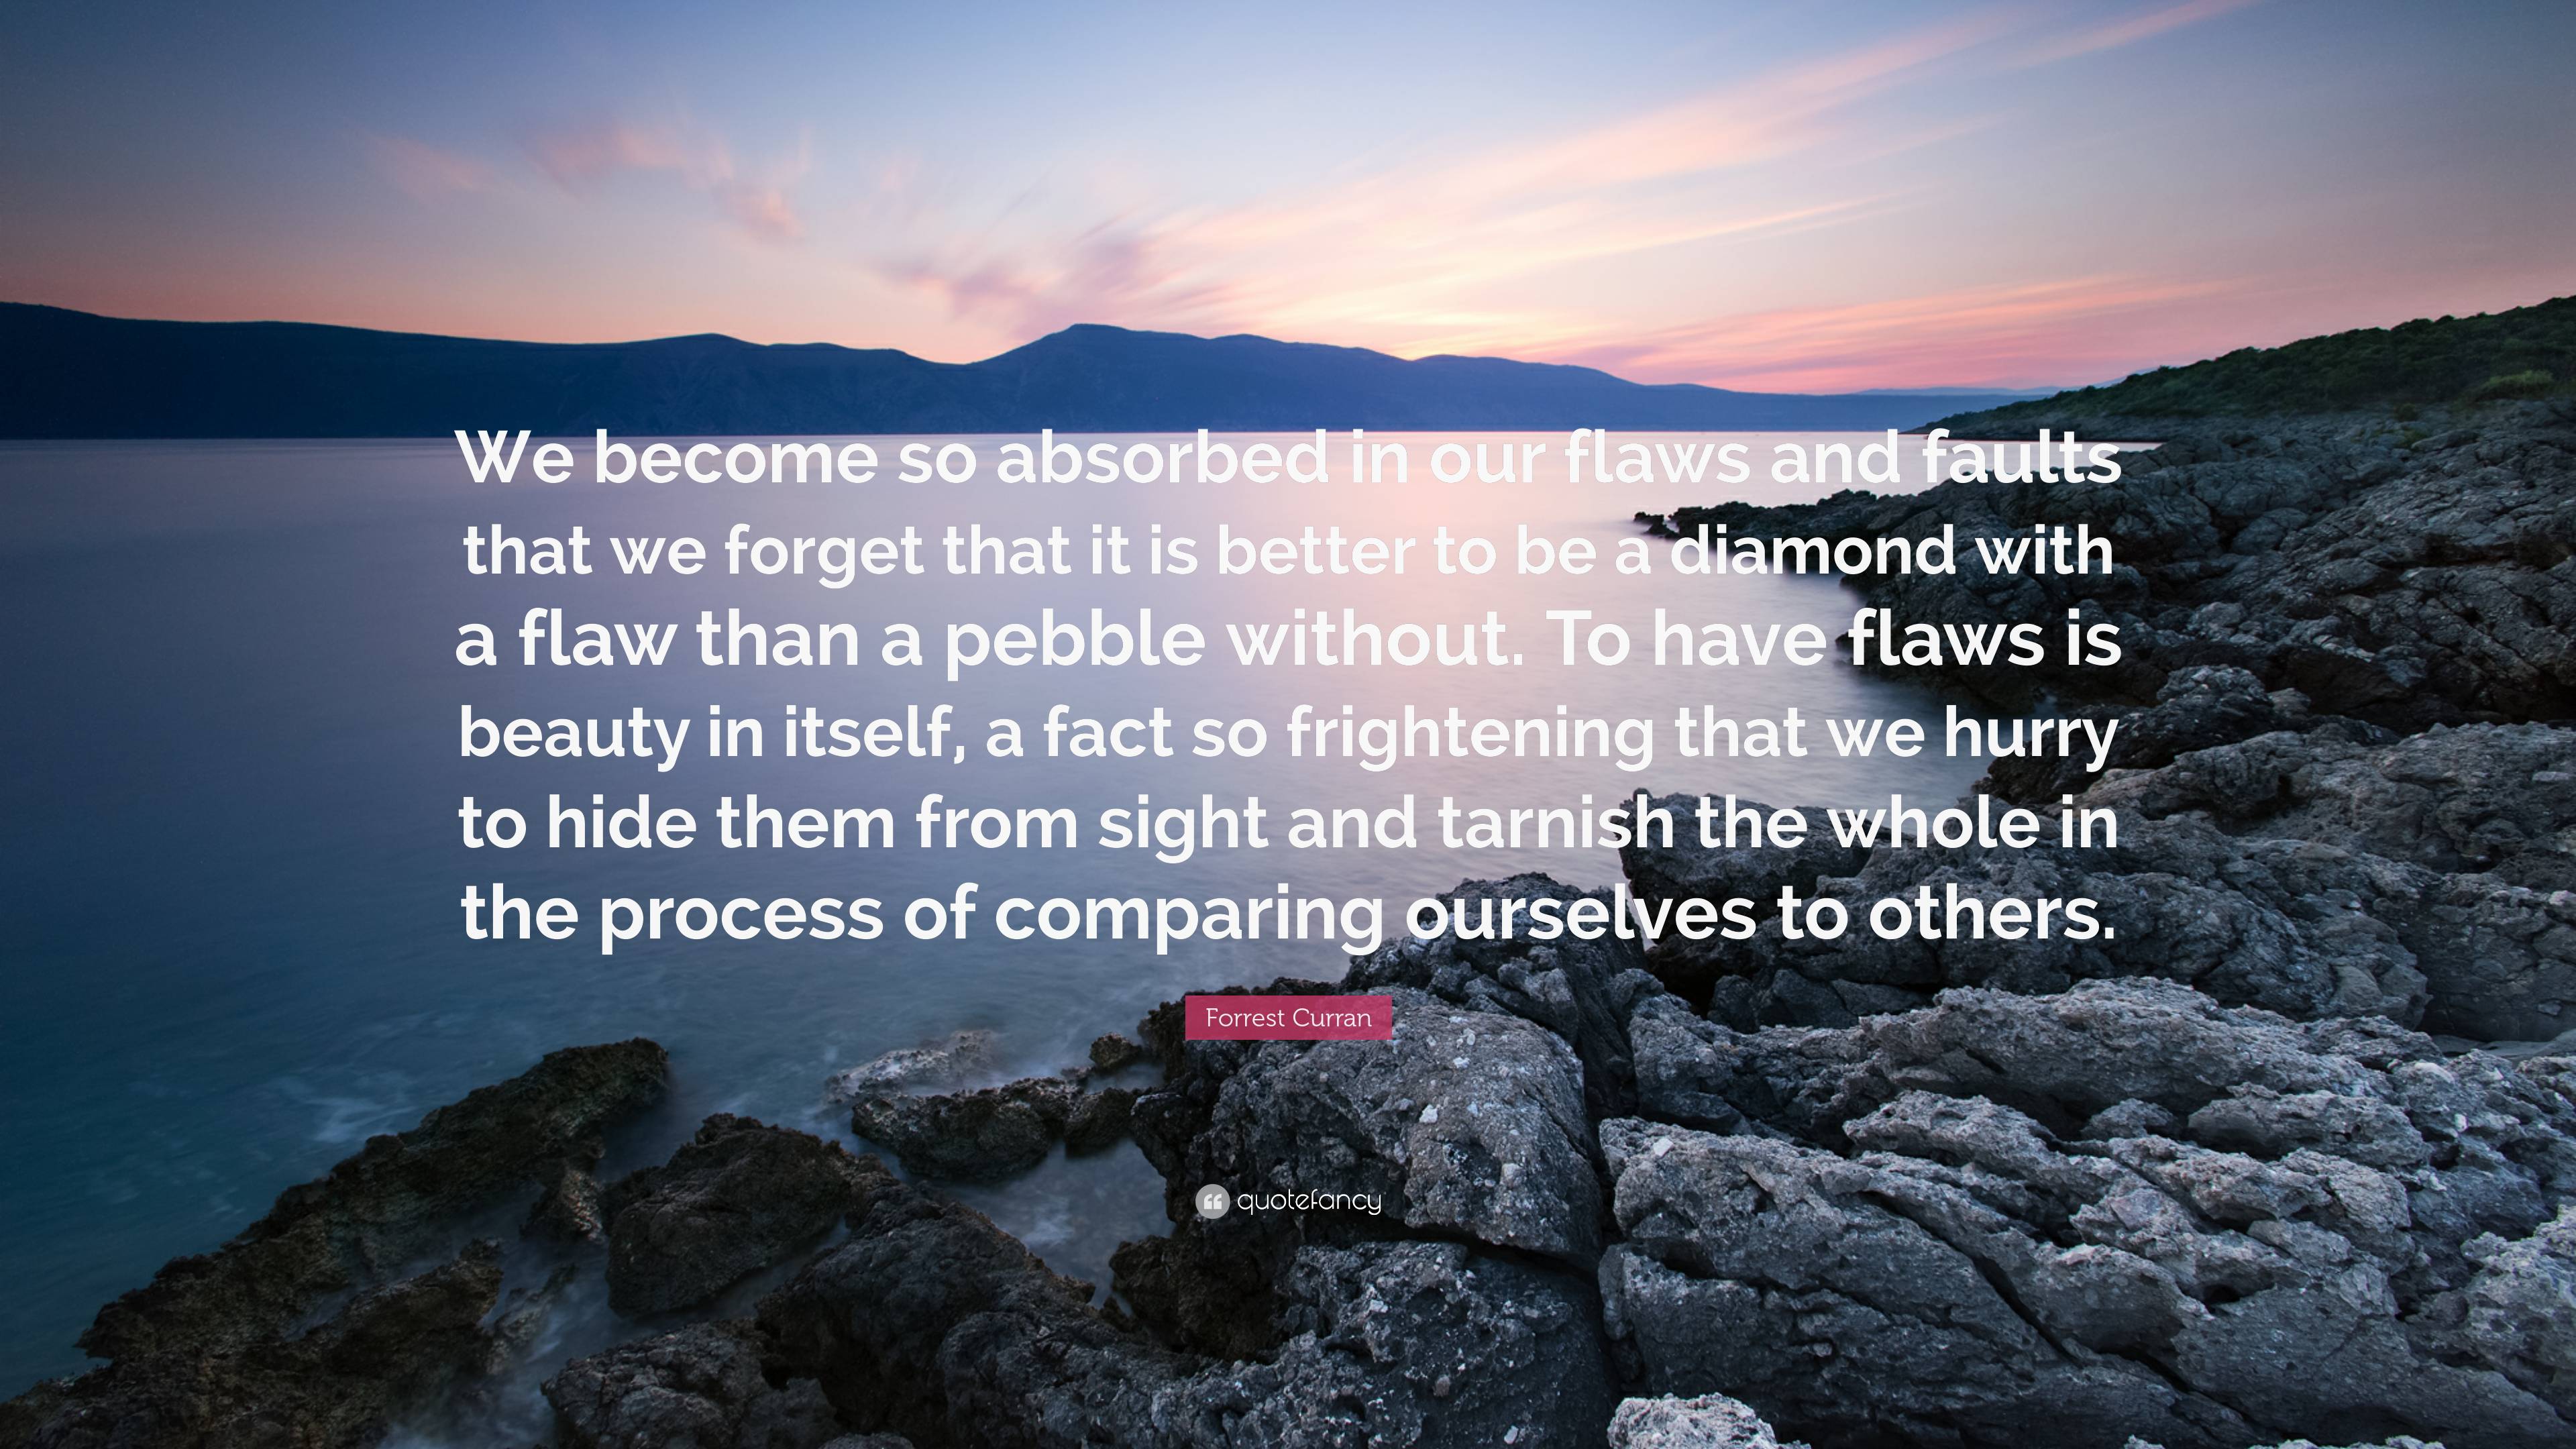 Forrest Curran Quote: “We become so absorbed in our flaws and faults ...